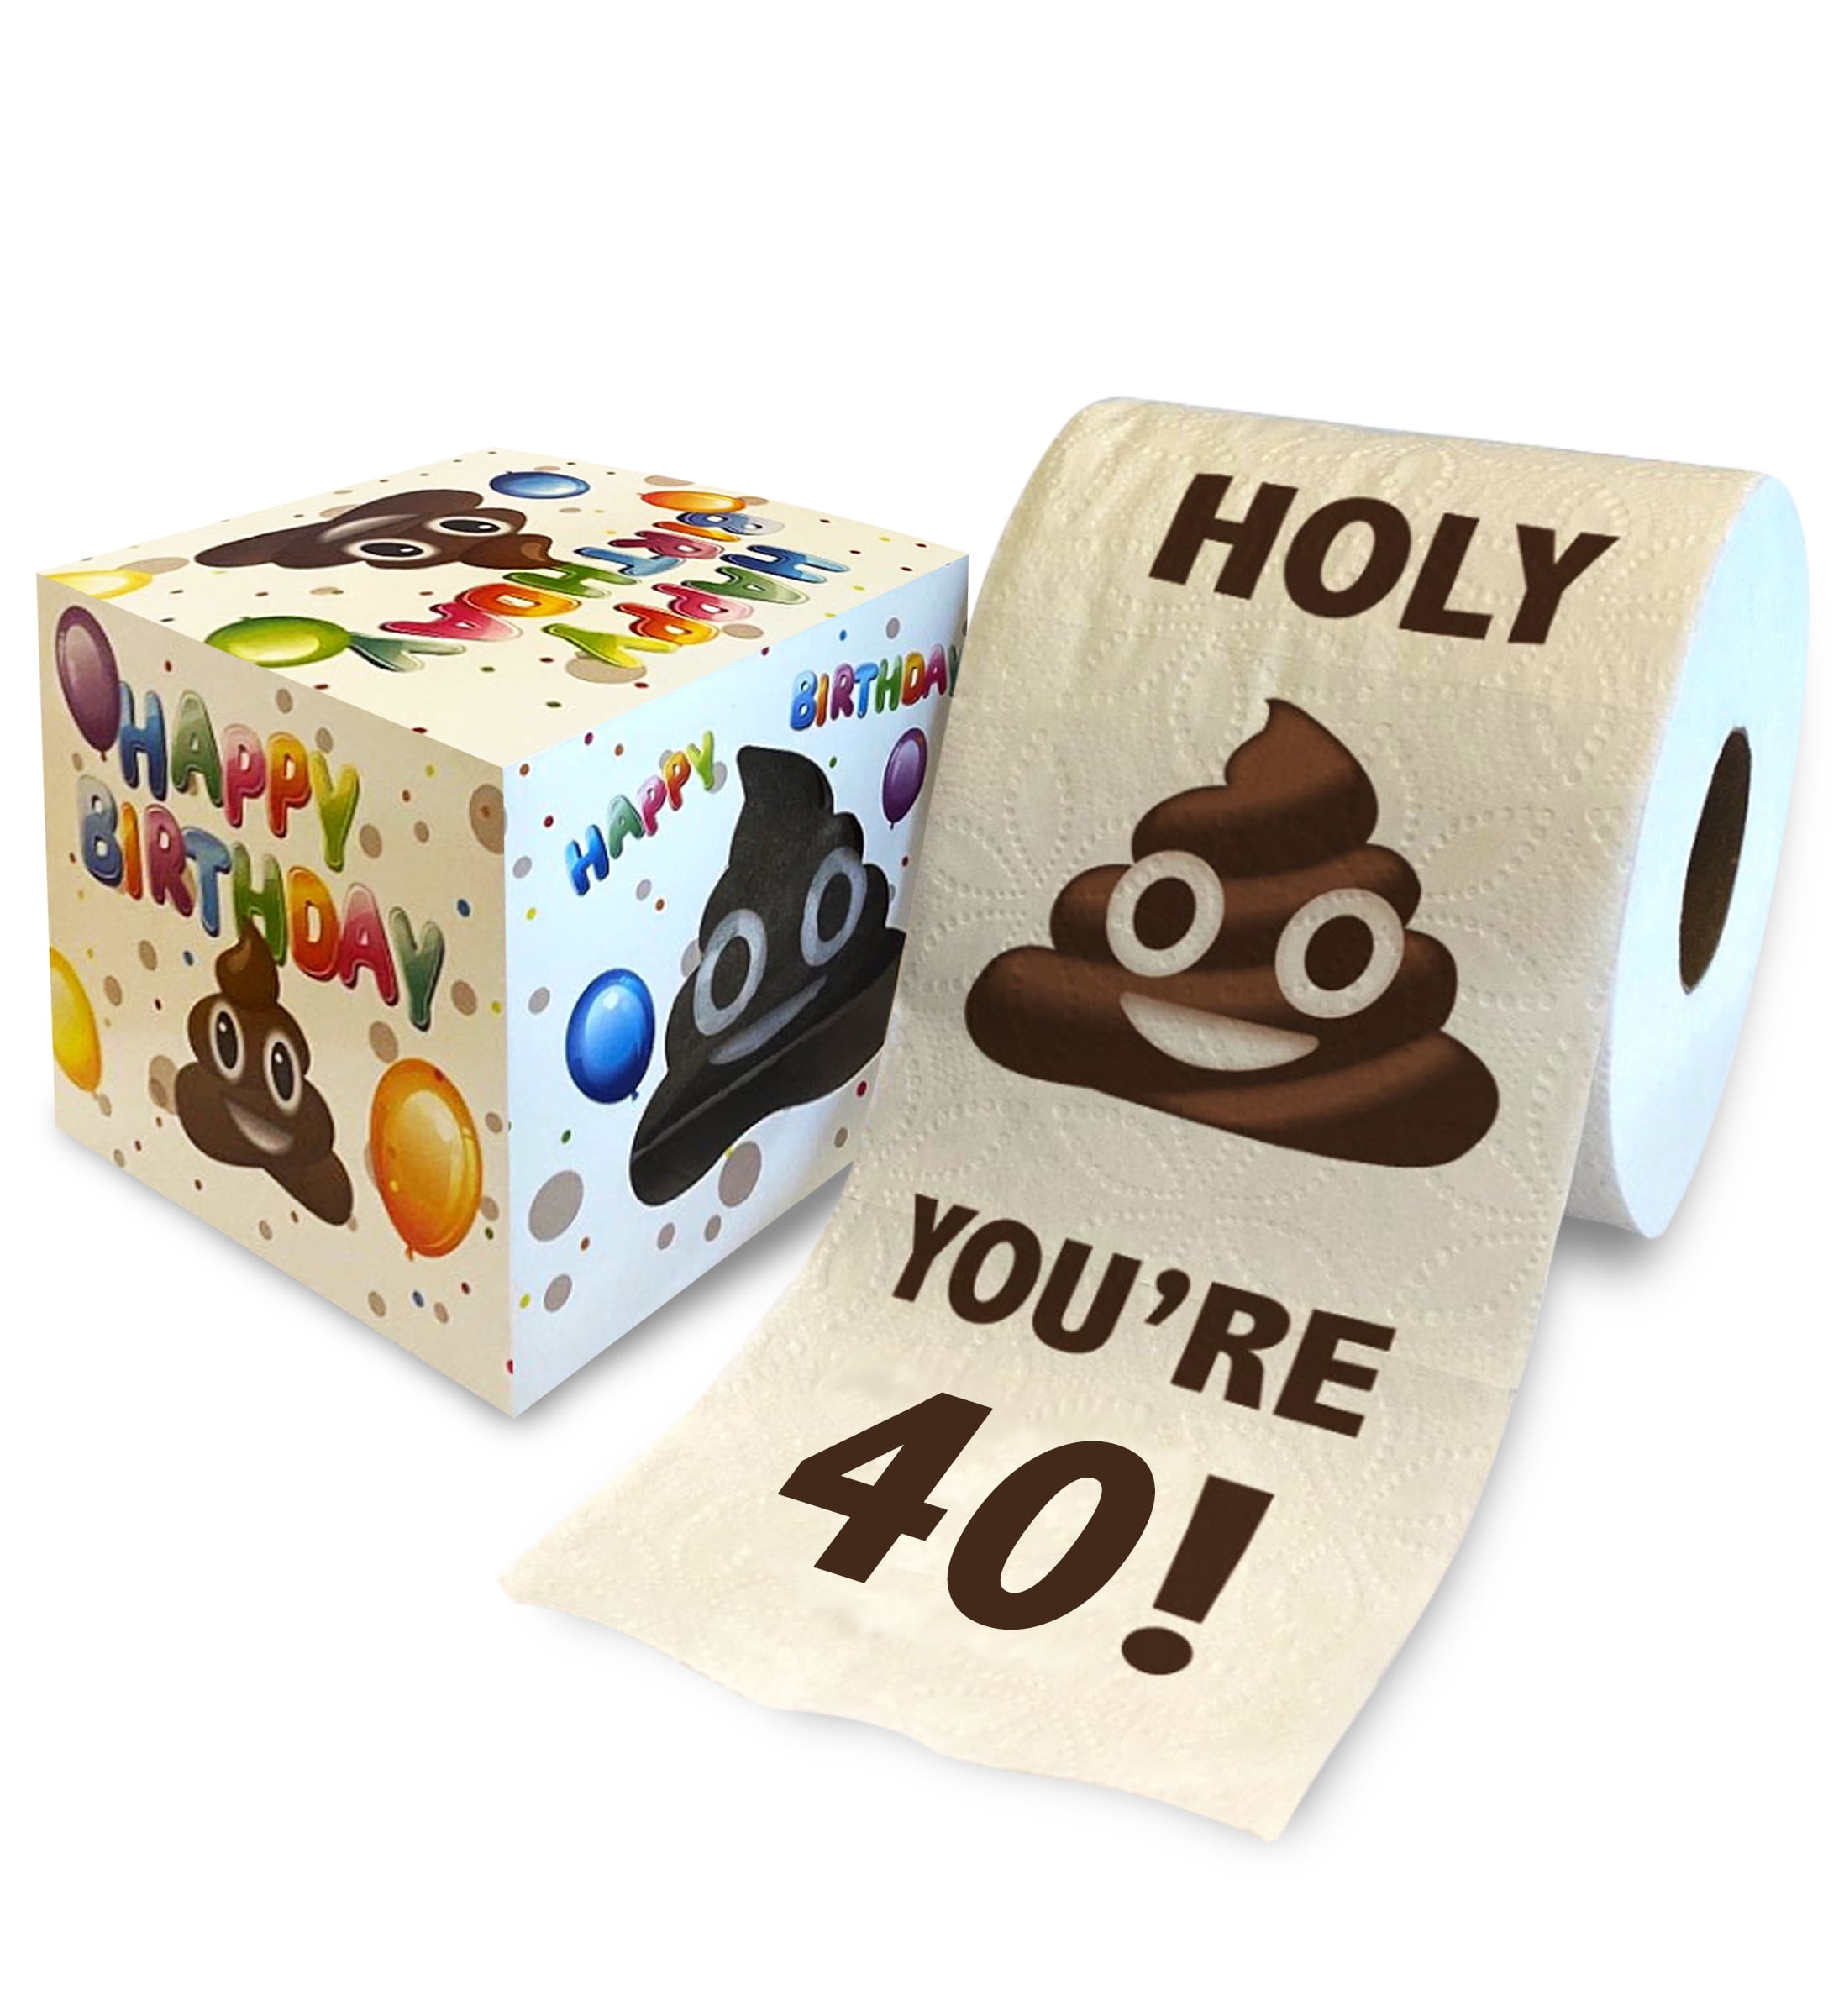 Printed TP Holy Poop You're 40 Printed Toilet Paper Gag Gift – Happy 40th Birthday Funny Toilet Paper For Best Prank, Surprise, Bathroom Decor, Novelty Bday Fun Gift For Men or Women -